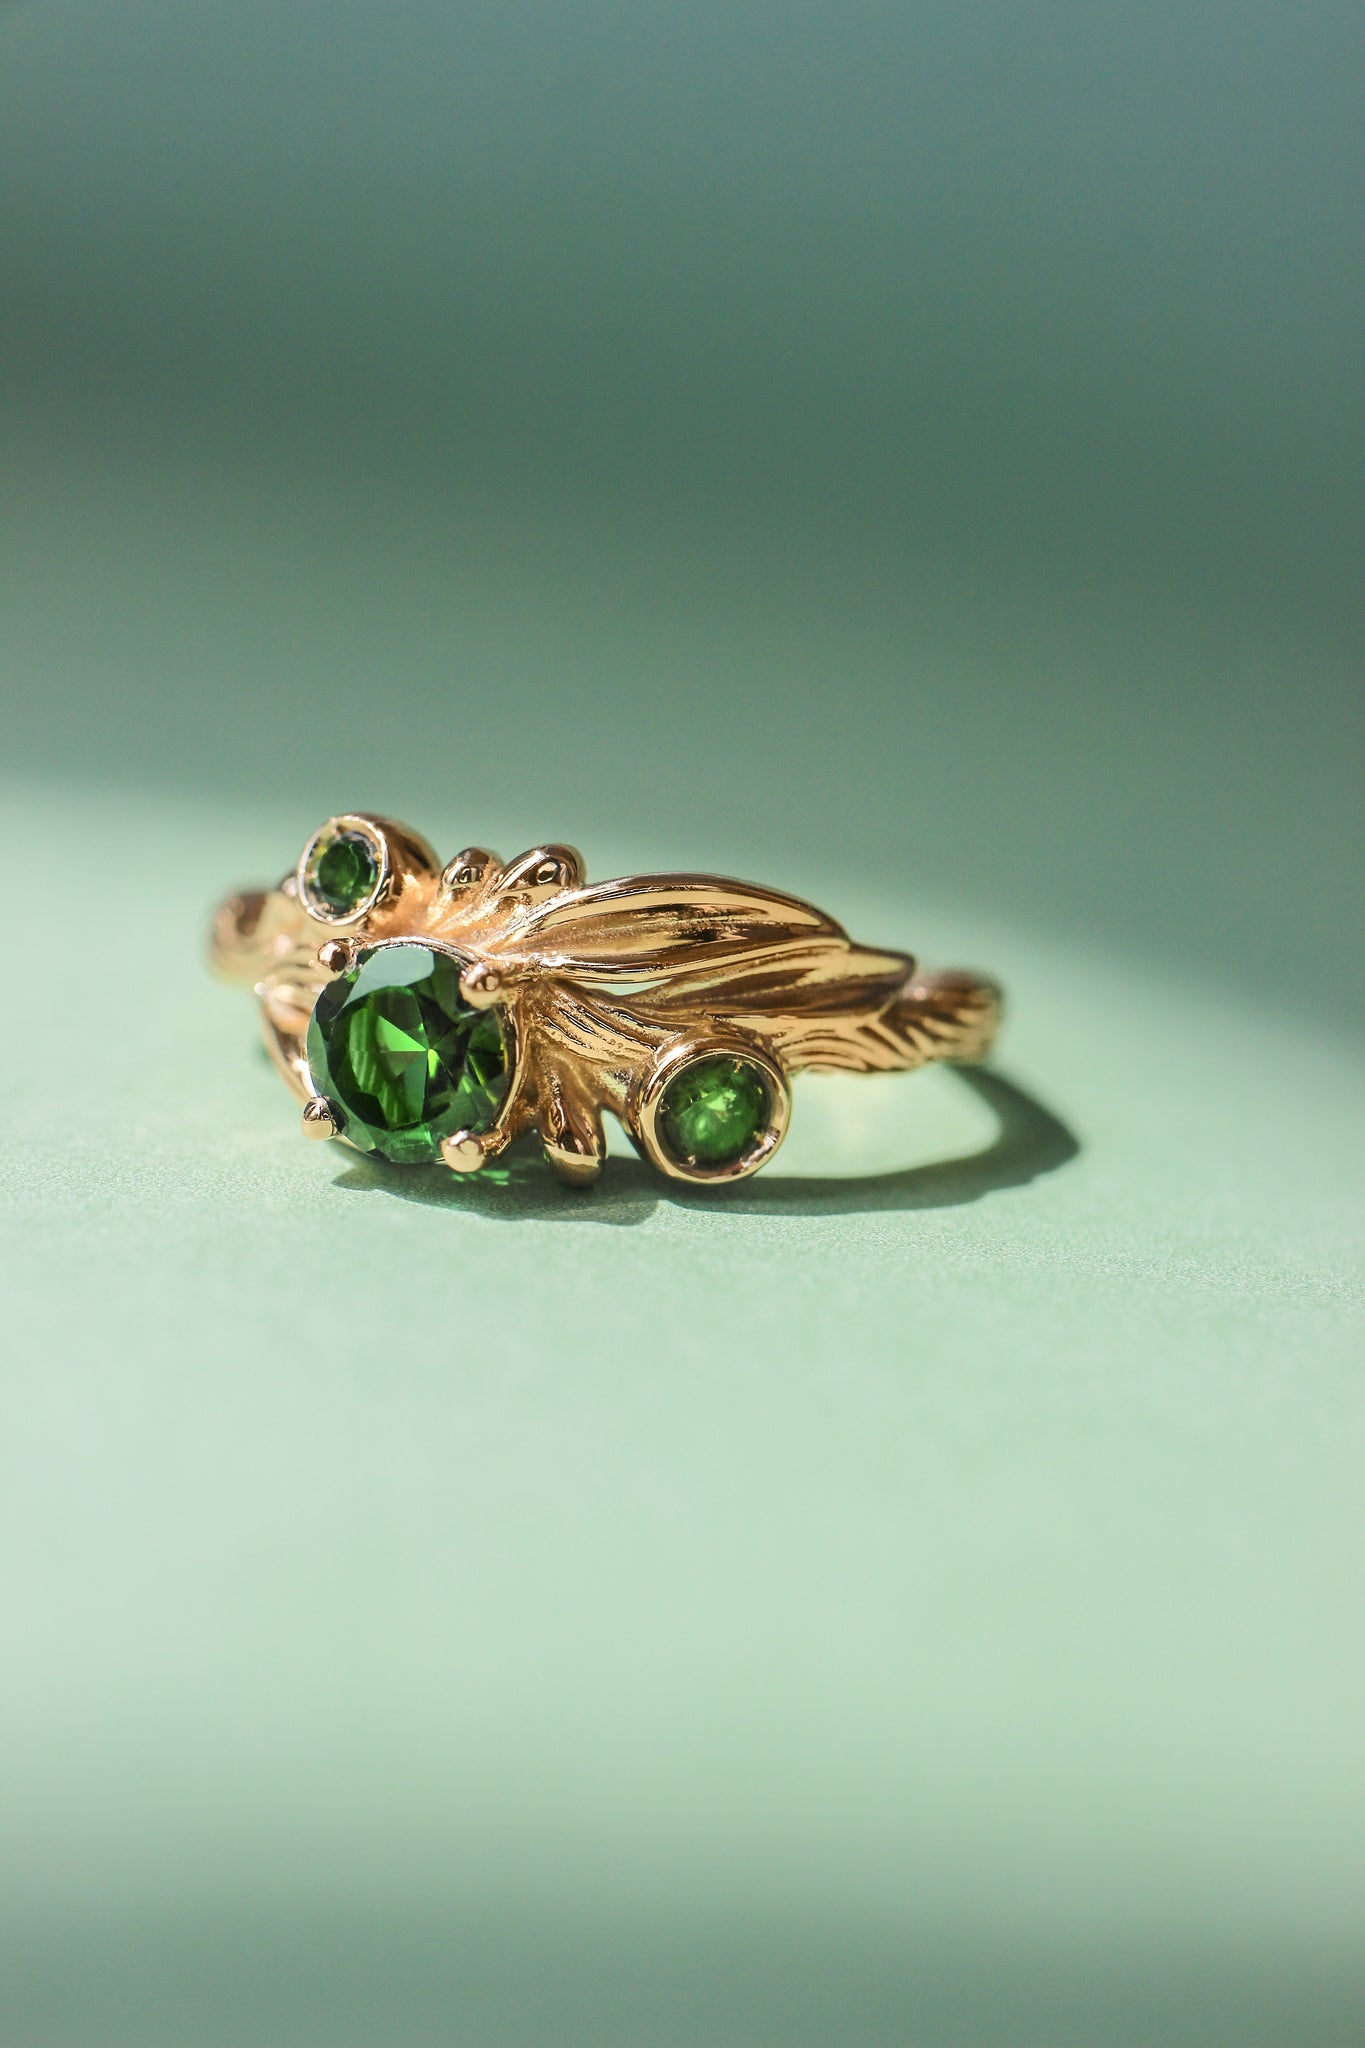 READY TO SHIP: Olivia in 14K yellow gold, natural untreated tourmalines 5mm, 2.5mm, 2mm, RING SIZE 6.25 US - Eden Garden Jewelry™